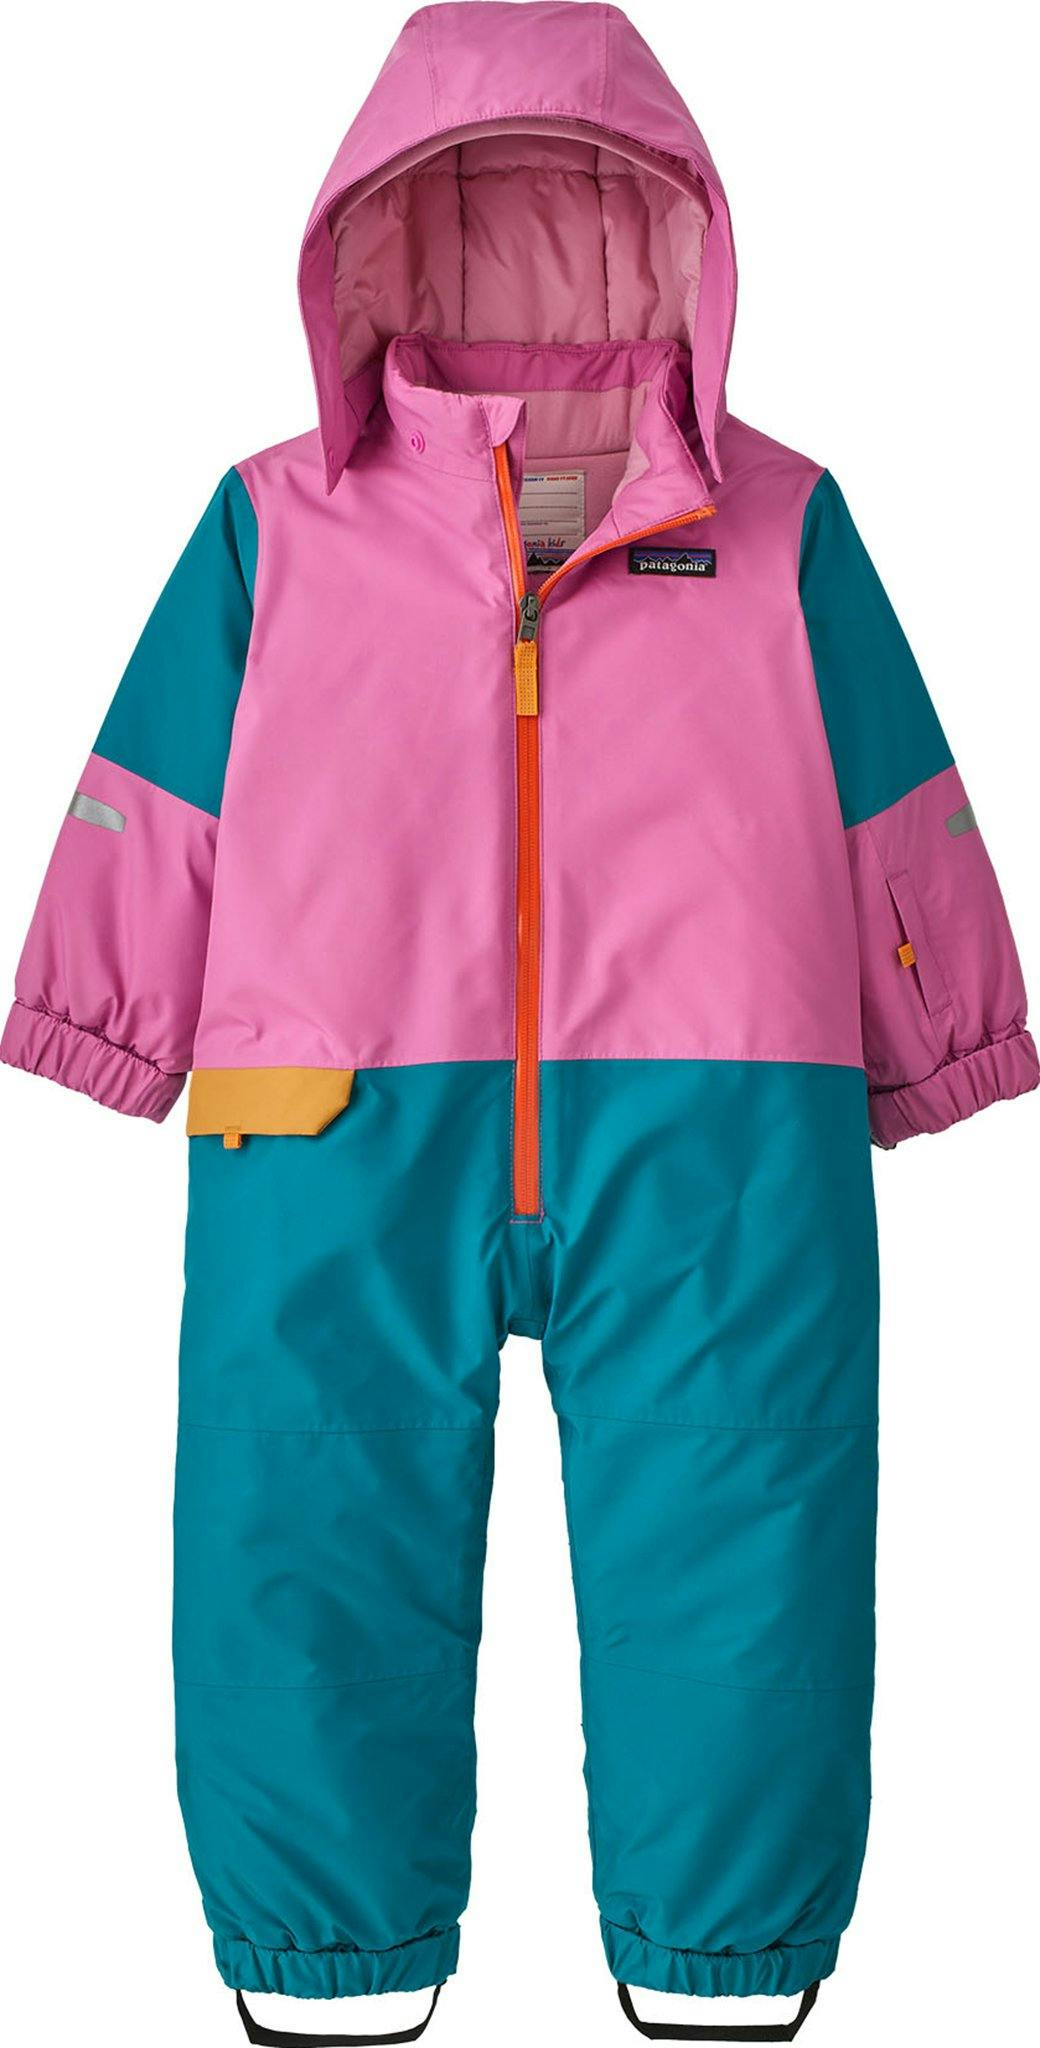 Product image for Snow Pile One-Piece - Baby